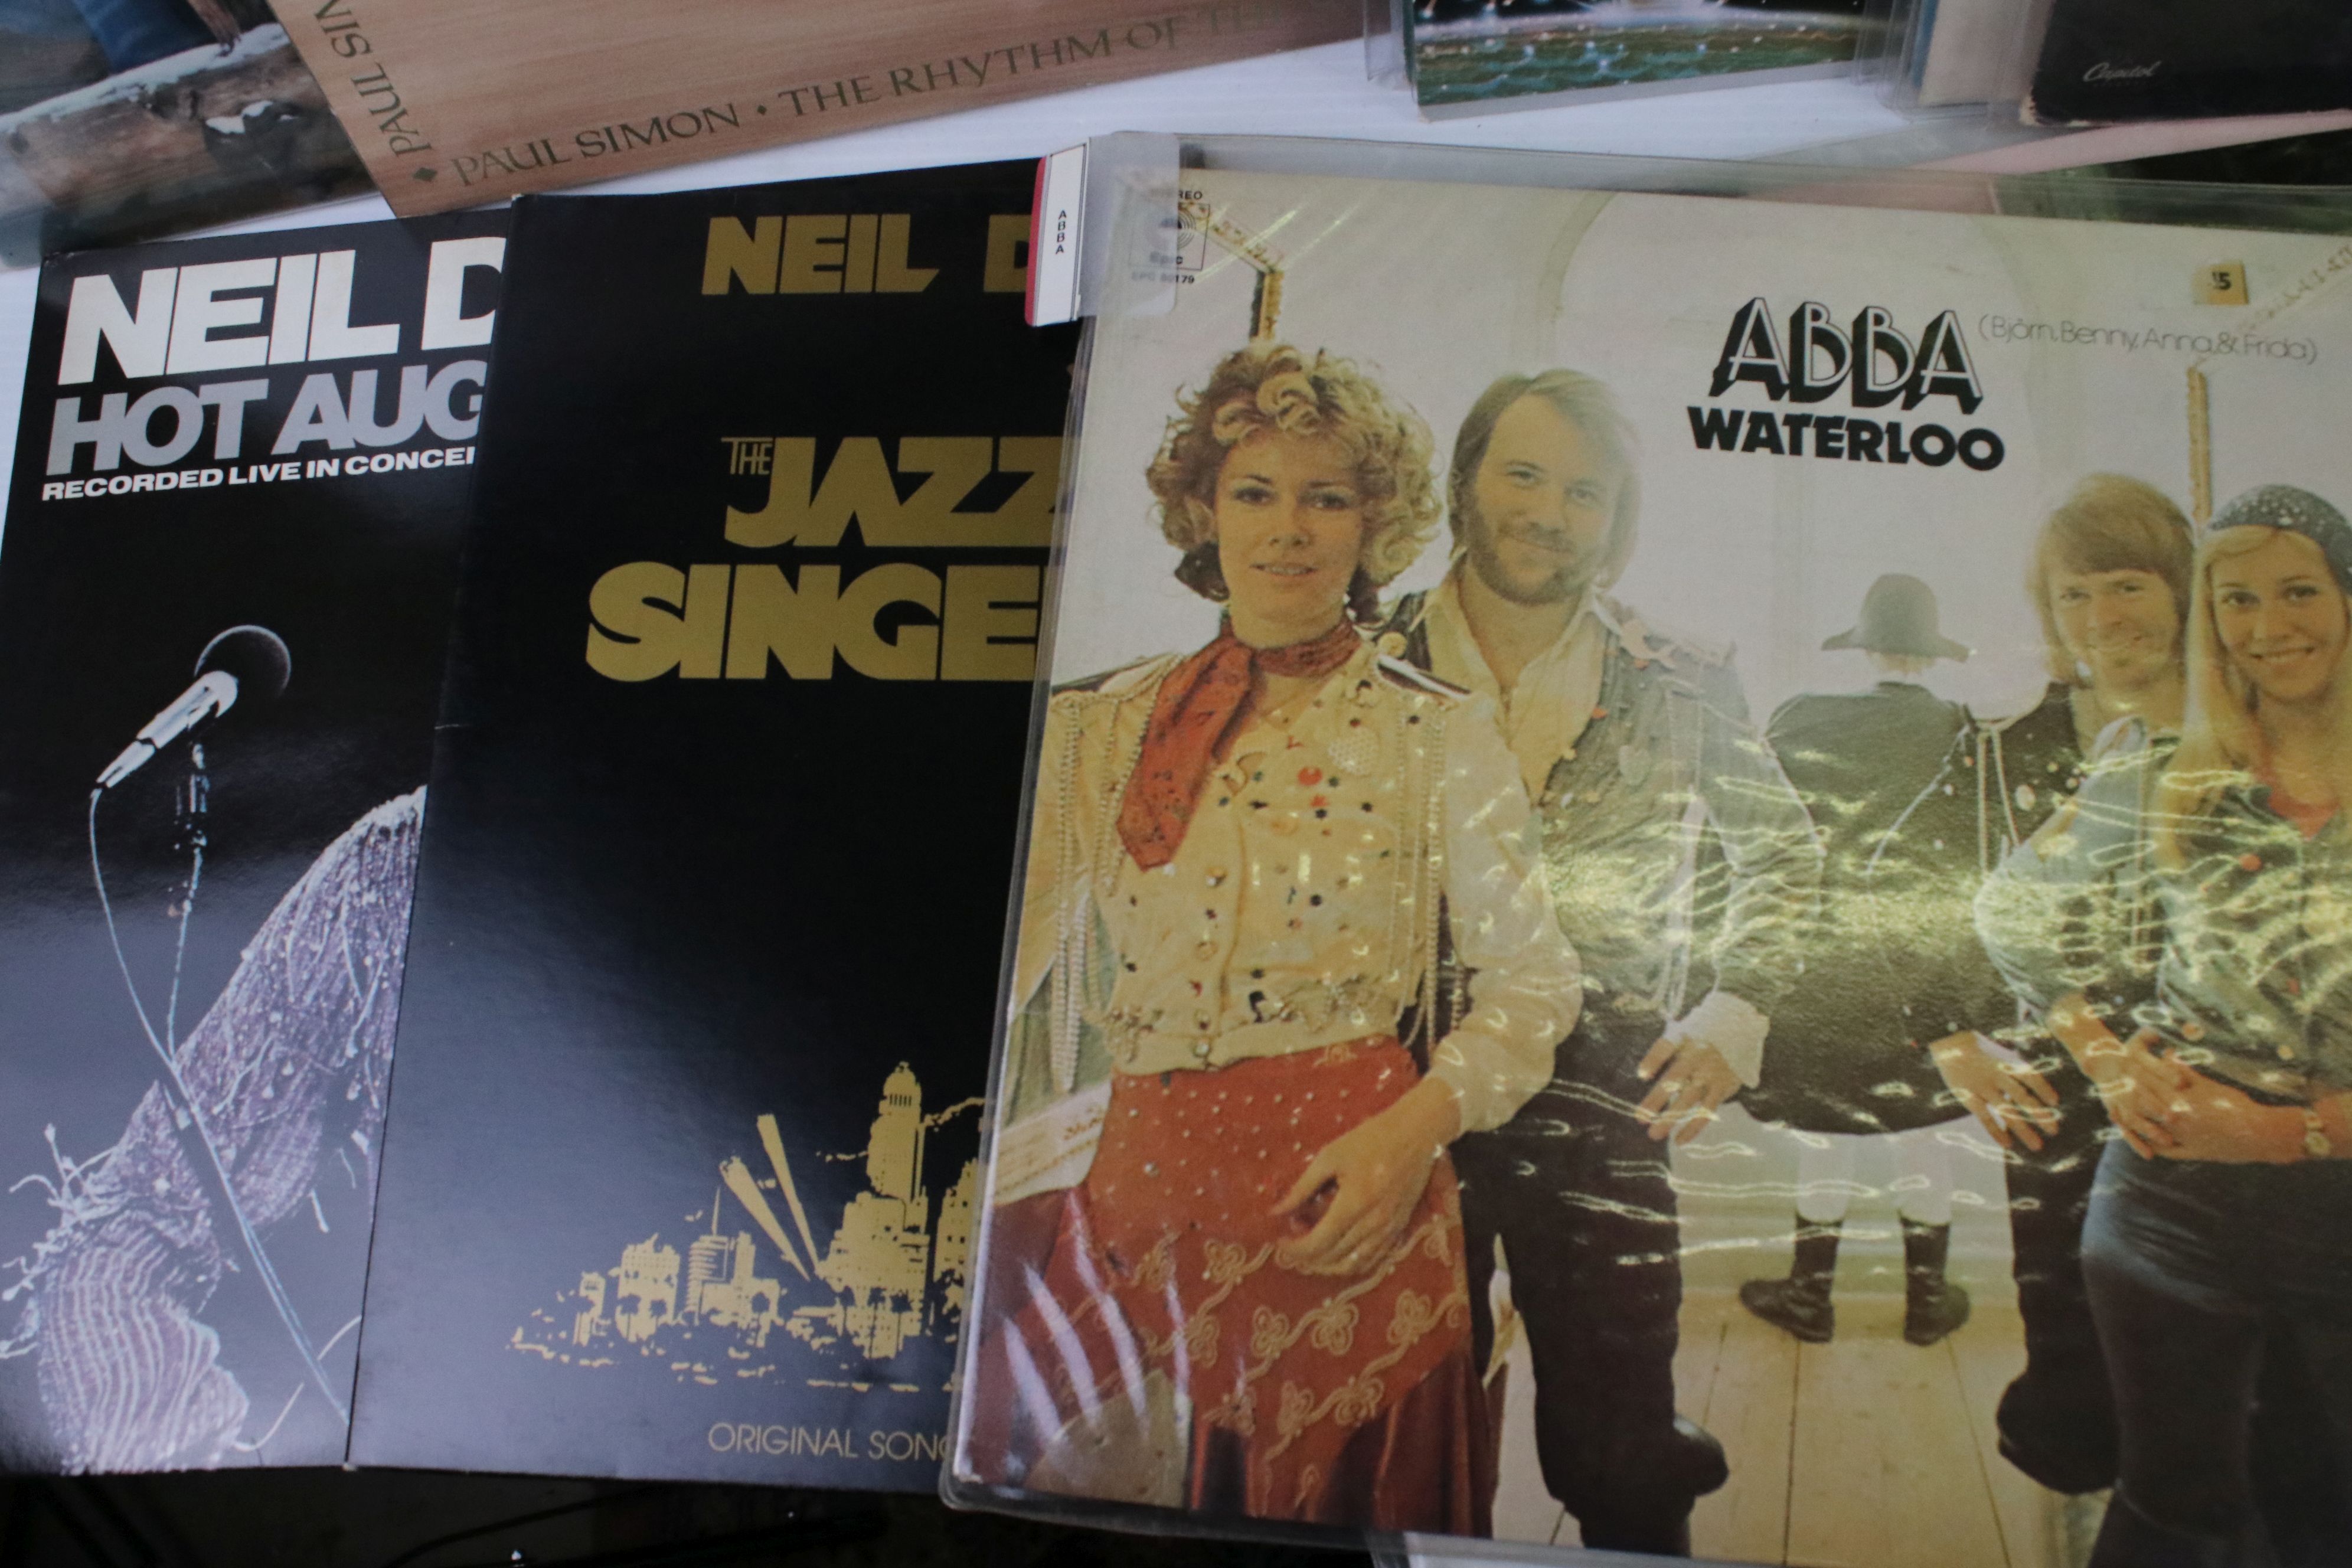 Vinyl - Collection of over 100 rock & pop LP's including Paul Simon, America, Allman Brothers, - Image 2 of 7